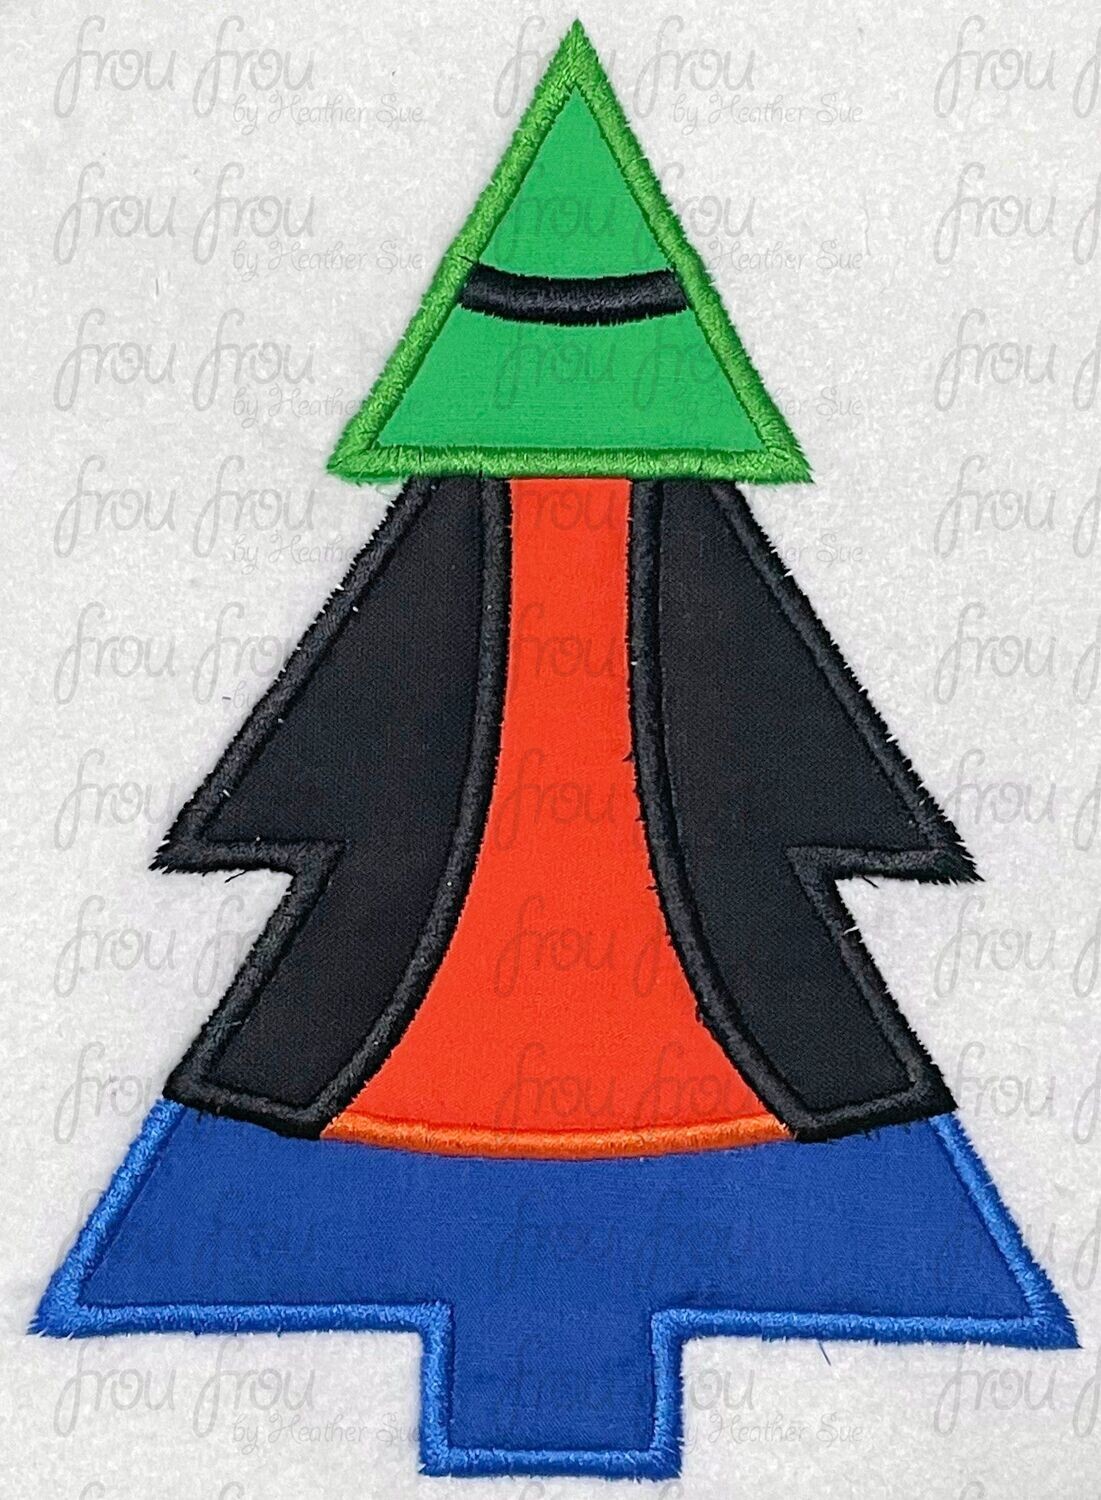 Guufy Christmas Tree Machine Applique Embroidery Design, Multiple Sizes 3